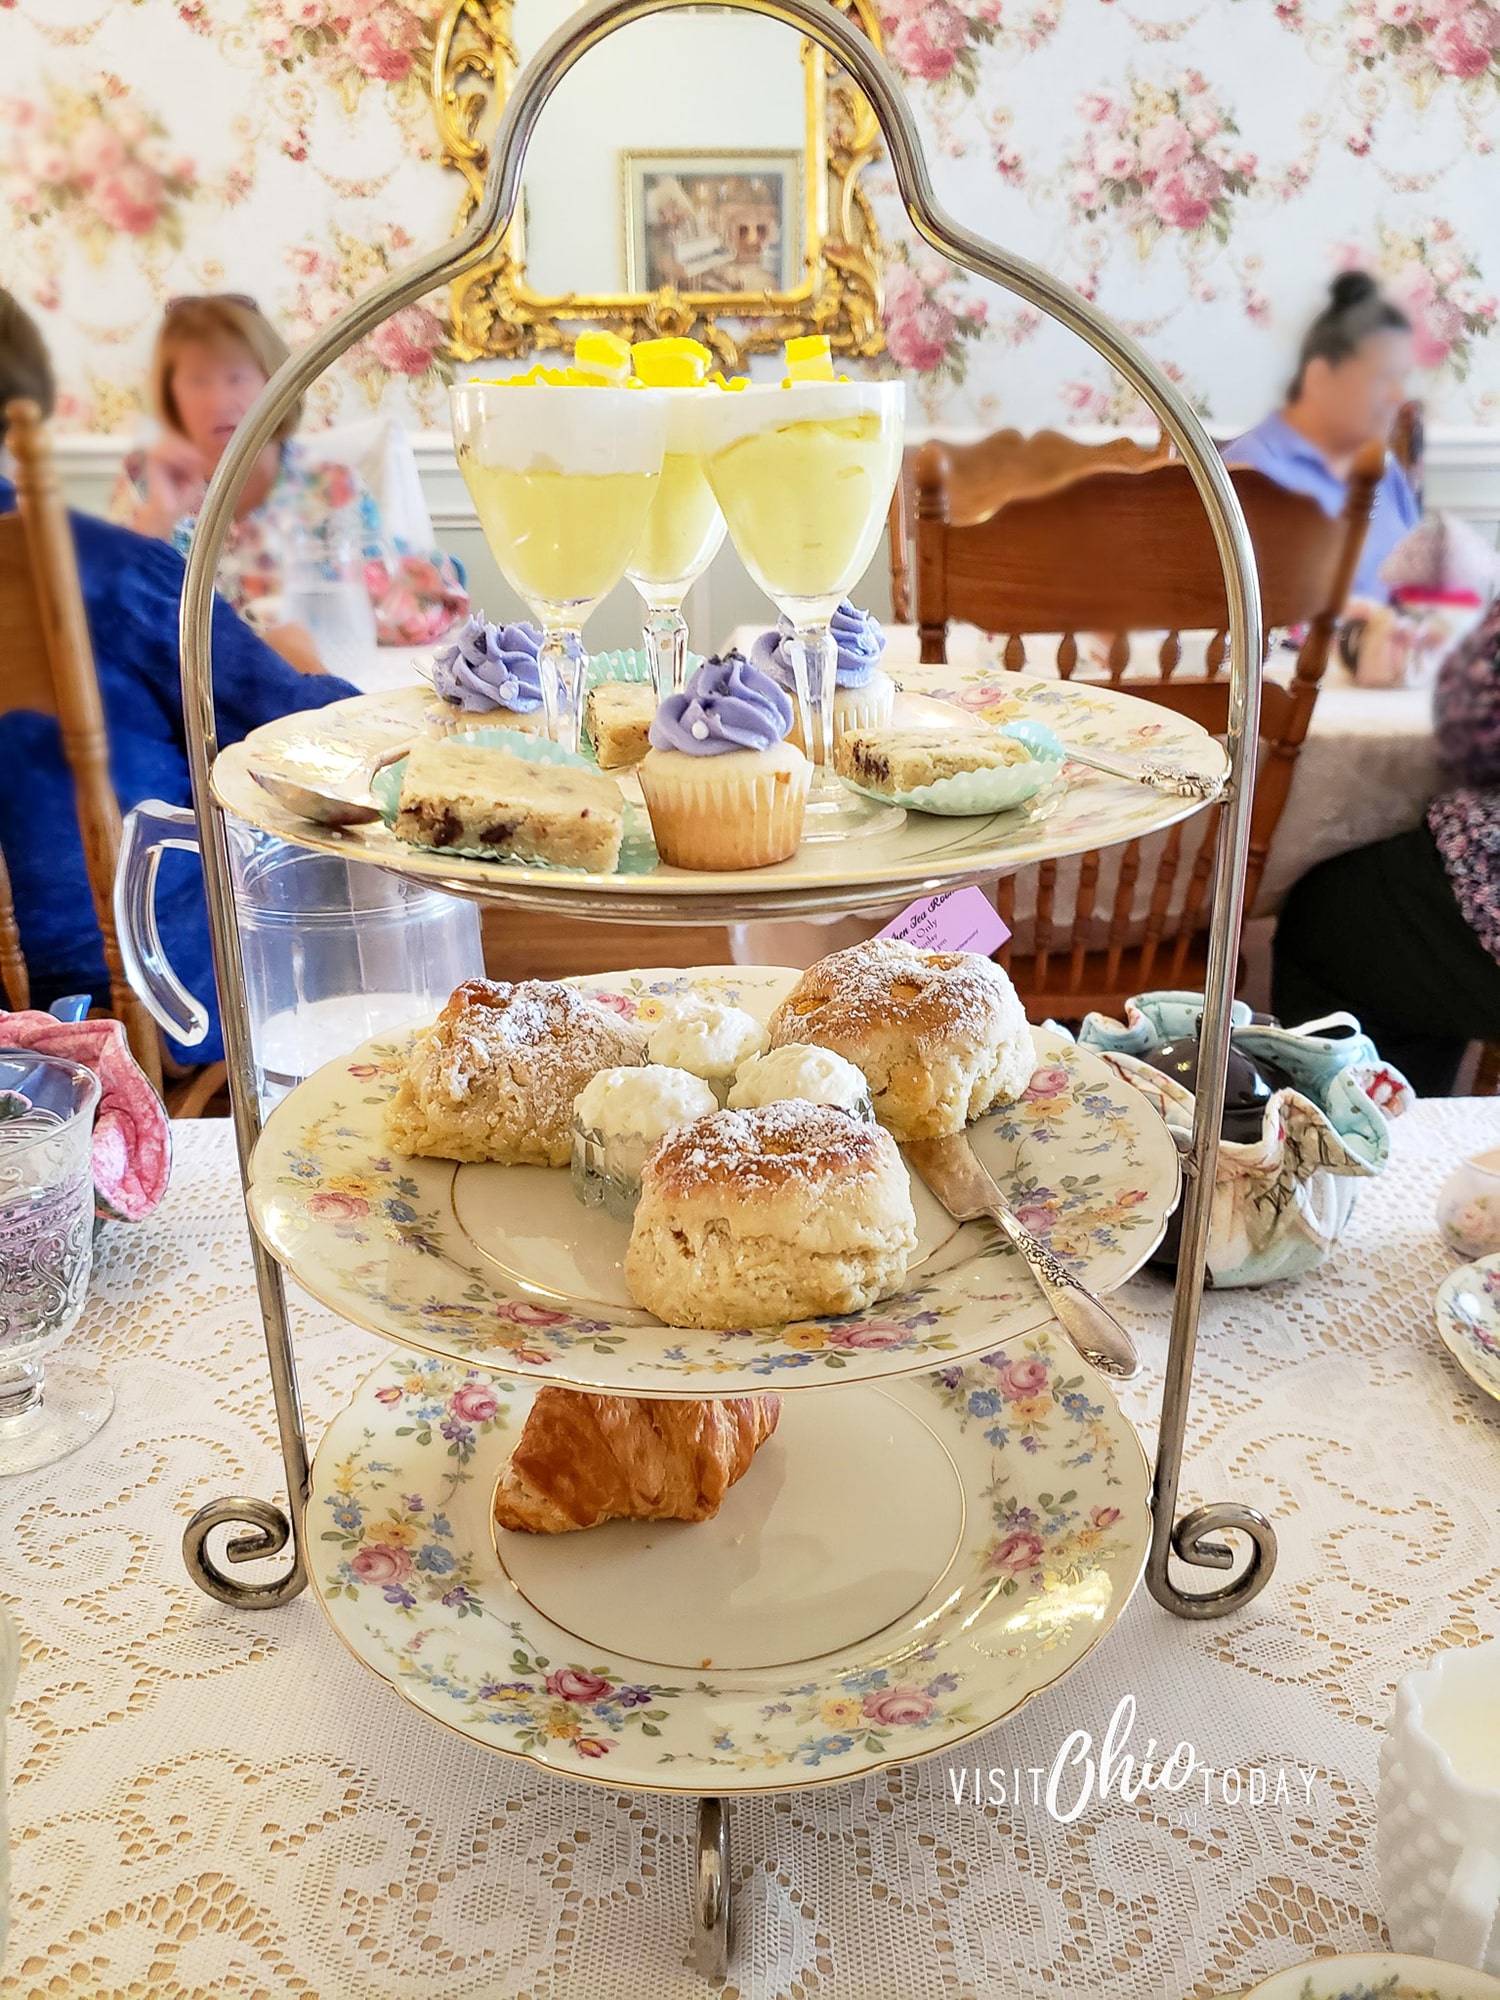 horizontal photo of an afternoon tea on a three-tiered plate stand with scones, cakes, pastries and desserts. Photo credit: Cindy Gordon of VisitOhioToday.com